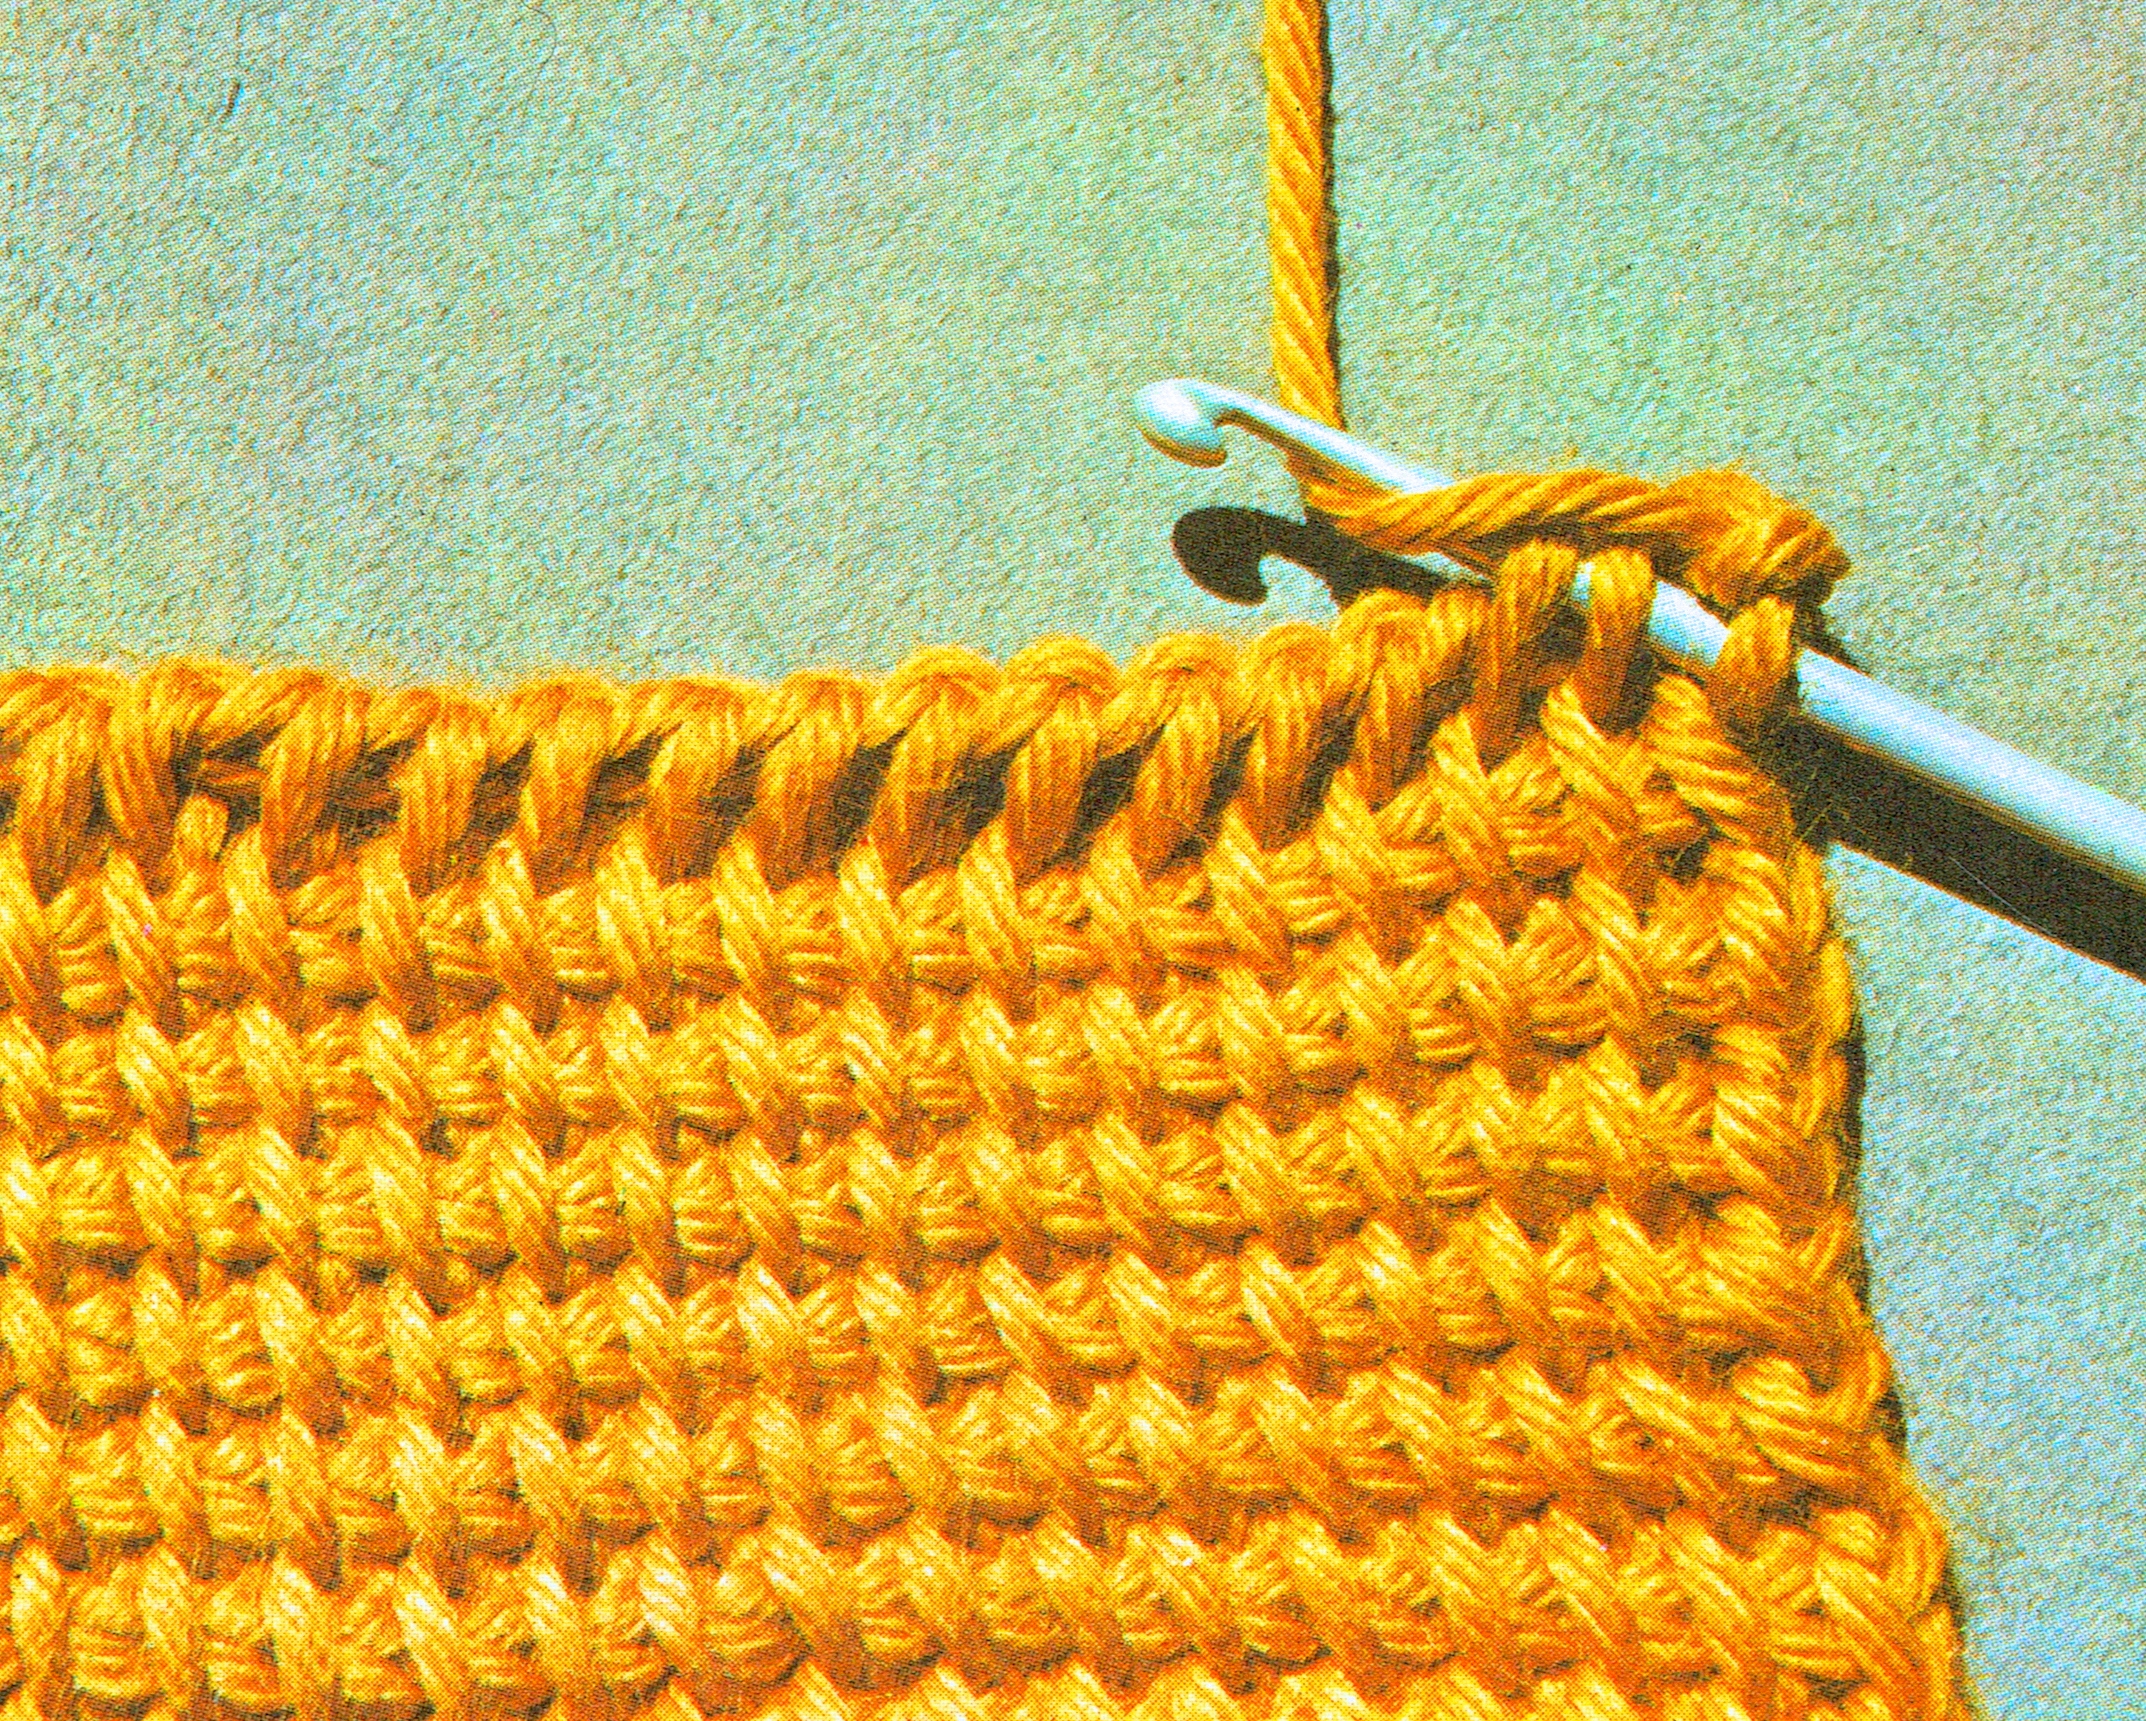 Decreasing one stitch at the right-hand edge